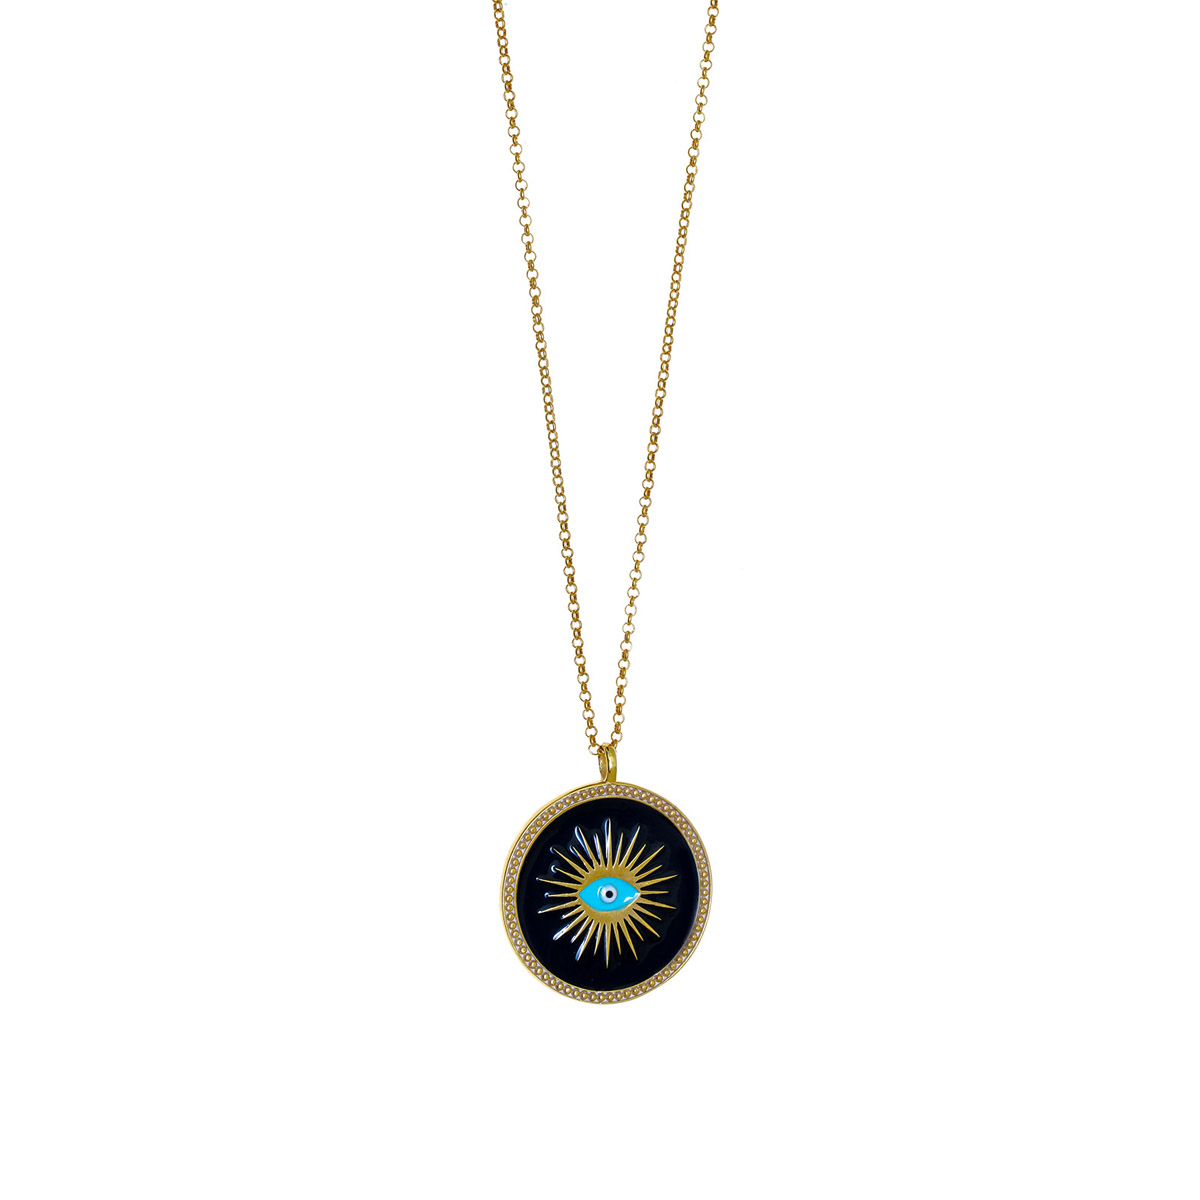 GREGIO Evil Eye Necklace with Black Enamel - Gold Plated Silver 925